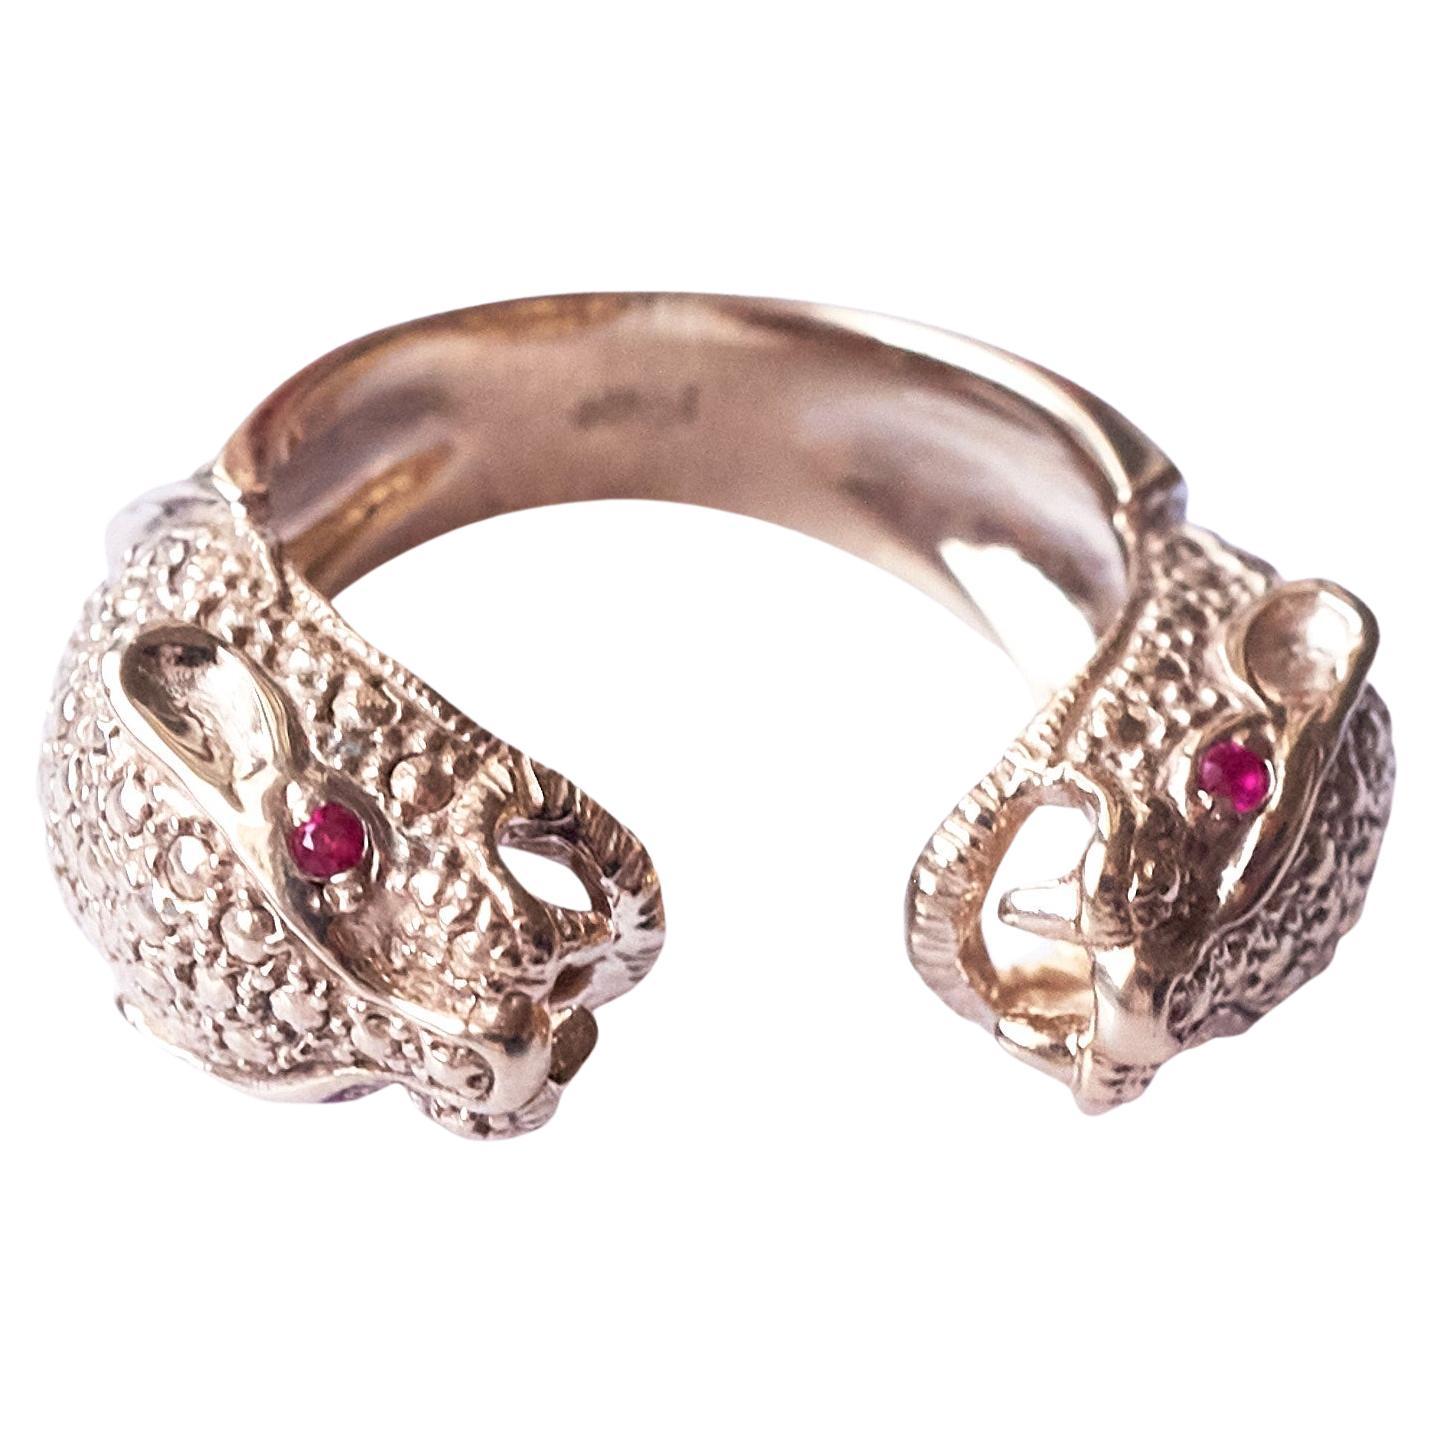 Ruby Jaguar Ring Bronze Animal Jewelry Cocktail Ring J Dauphin For Sale